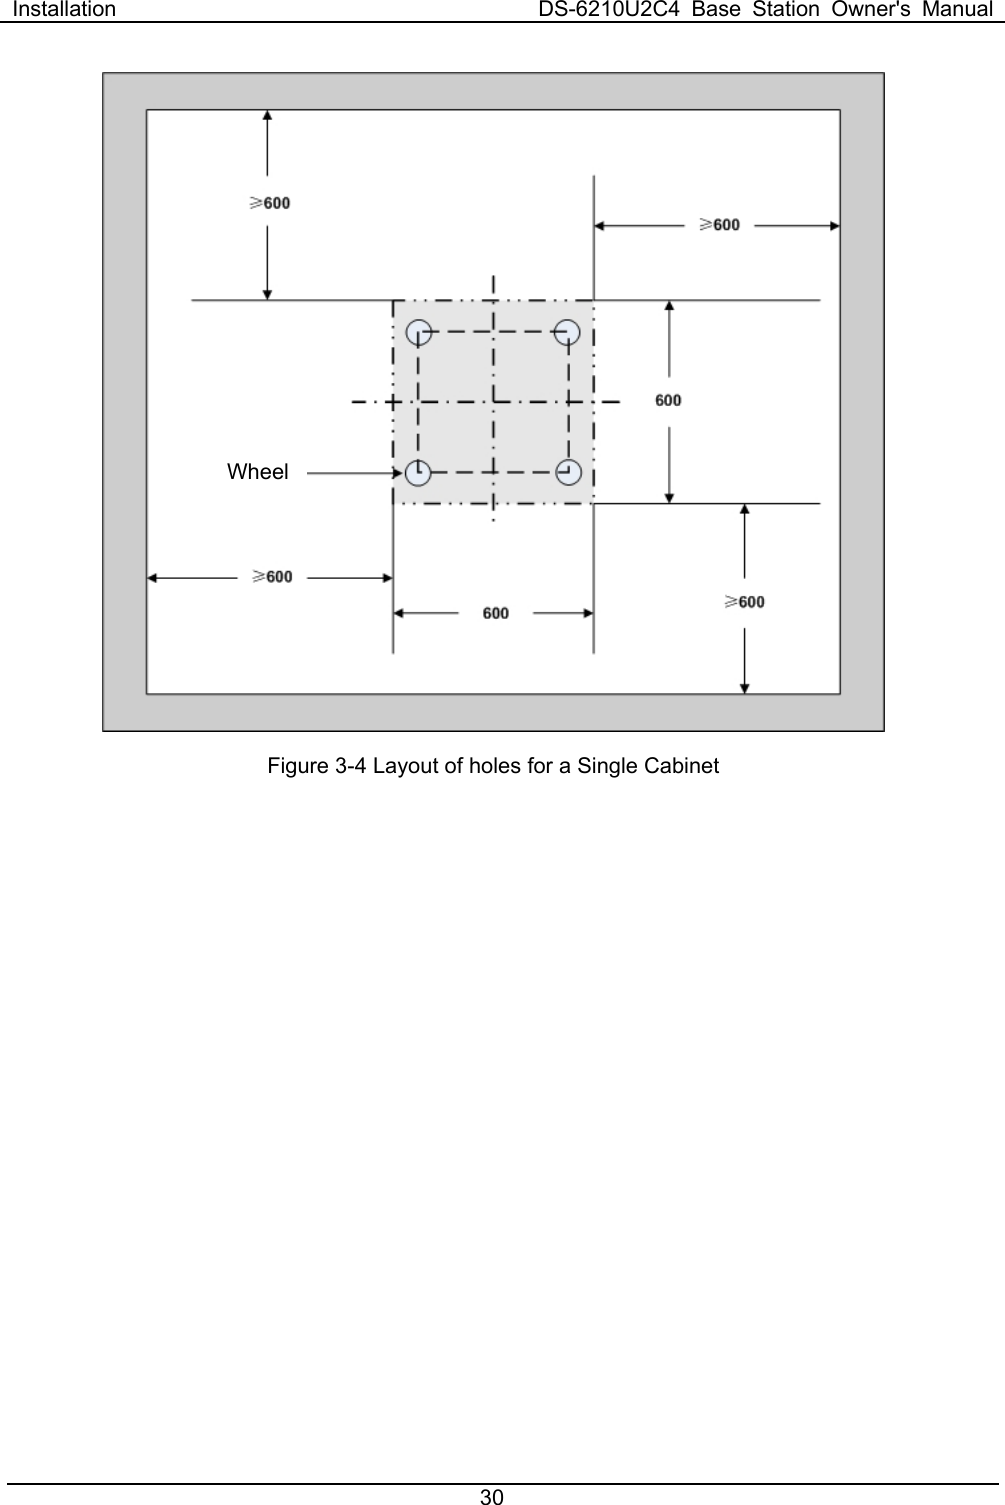 Installation  DS-6210U2C4 Base Station Owner&apos;s Manual 30   Figure 3-4 Layout of holes for a Single Cabinet   Wheel 